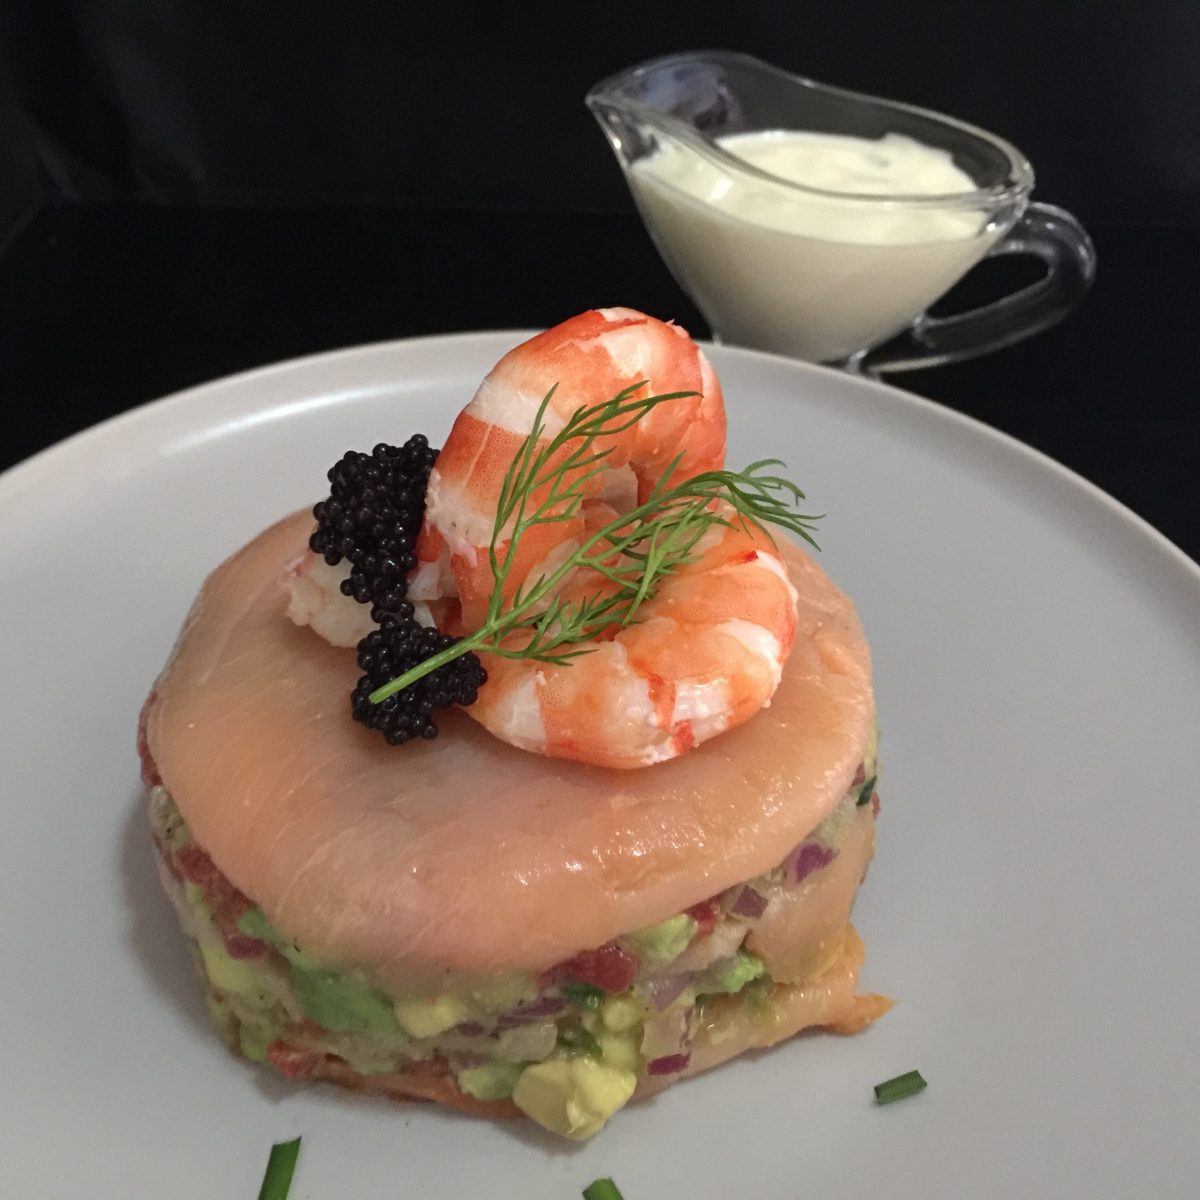 layers of smoked salmon lemony avocado salsa topped with 3 fresh ly peeled prawns and a little black caviar with a sprig of dill and lemony mayonnaise dressing with chopped dill or chives on the side by cooking meals for one